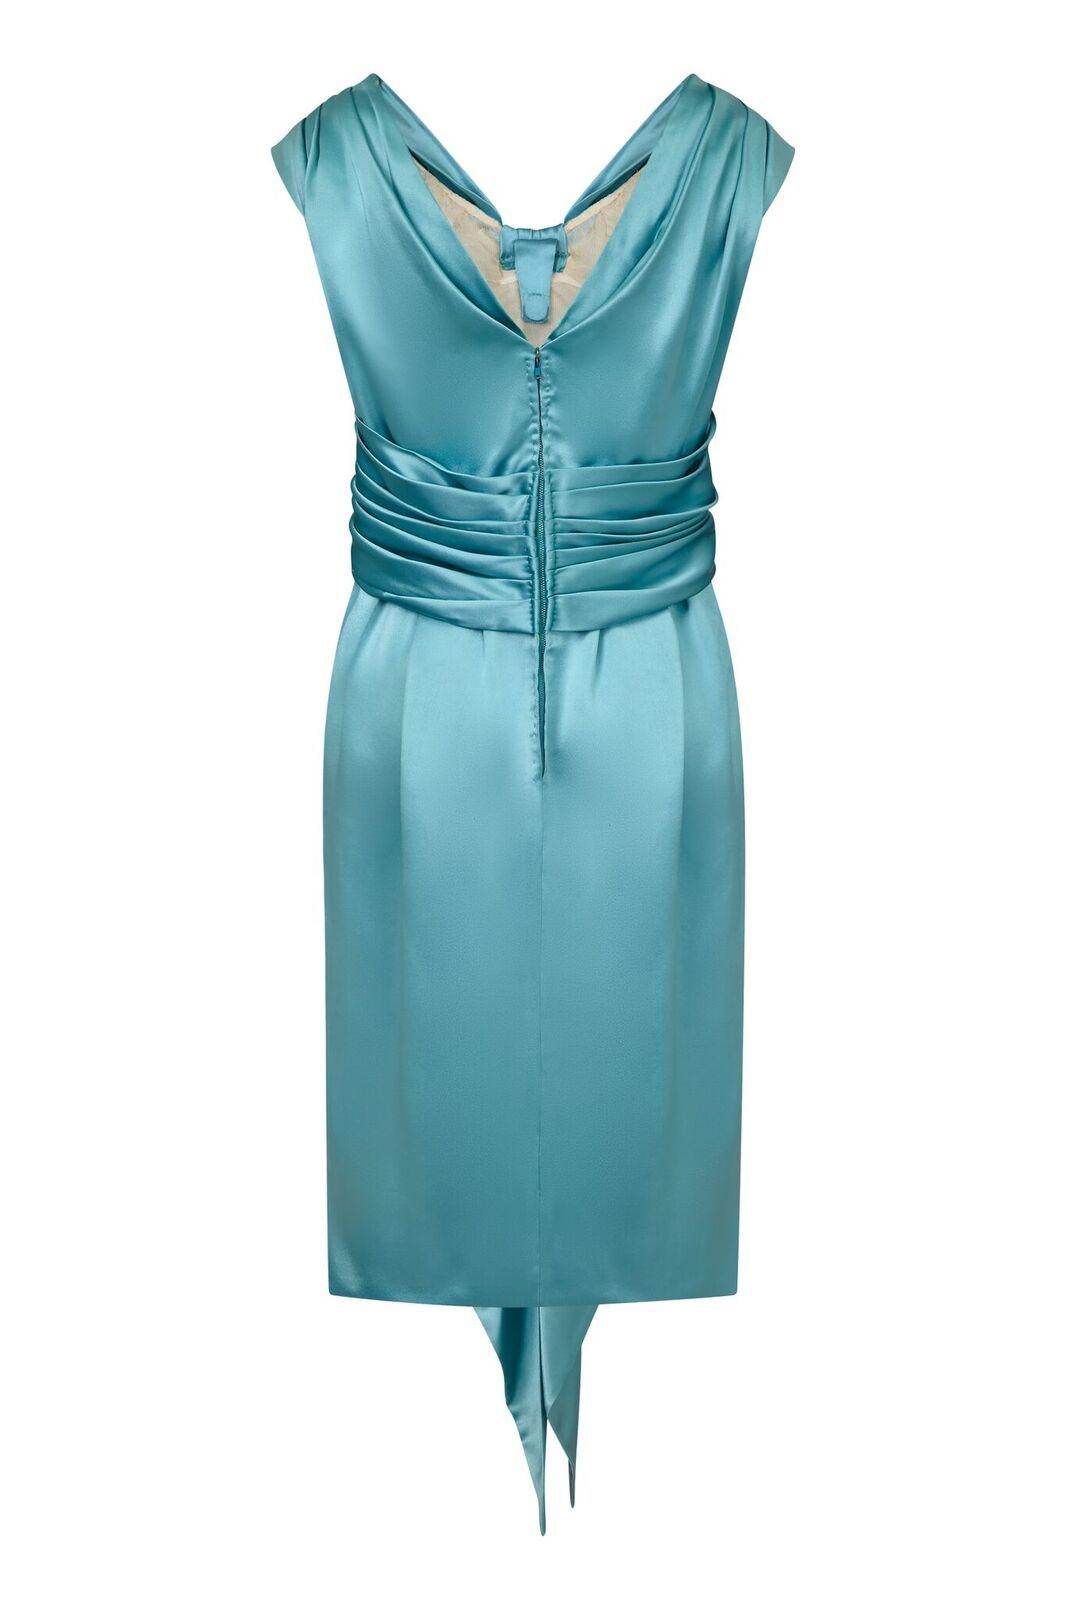 This 1950s Hardy Amies couture label rich silk satin occasion dress in pale aquamarine perfectly showcases the skill and refinement for which its designer is extolled. Celebrated for opulent occasion wear in structured silks, Amis was a favourite of